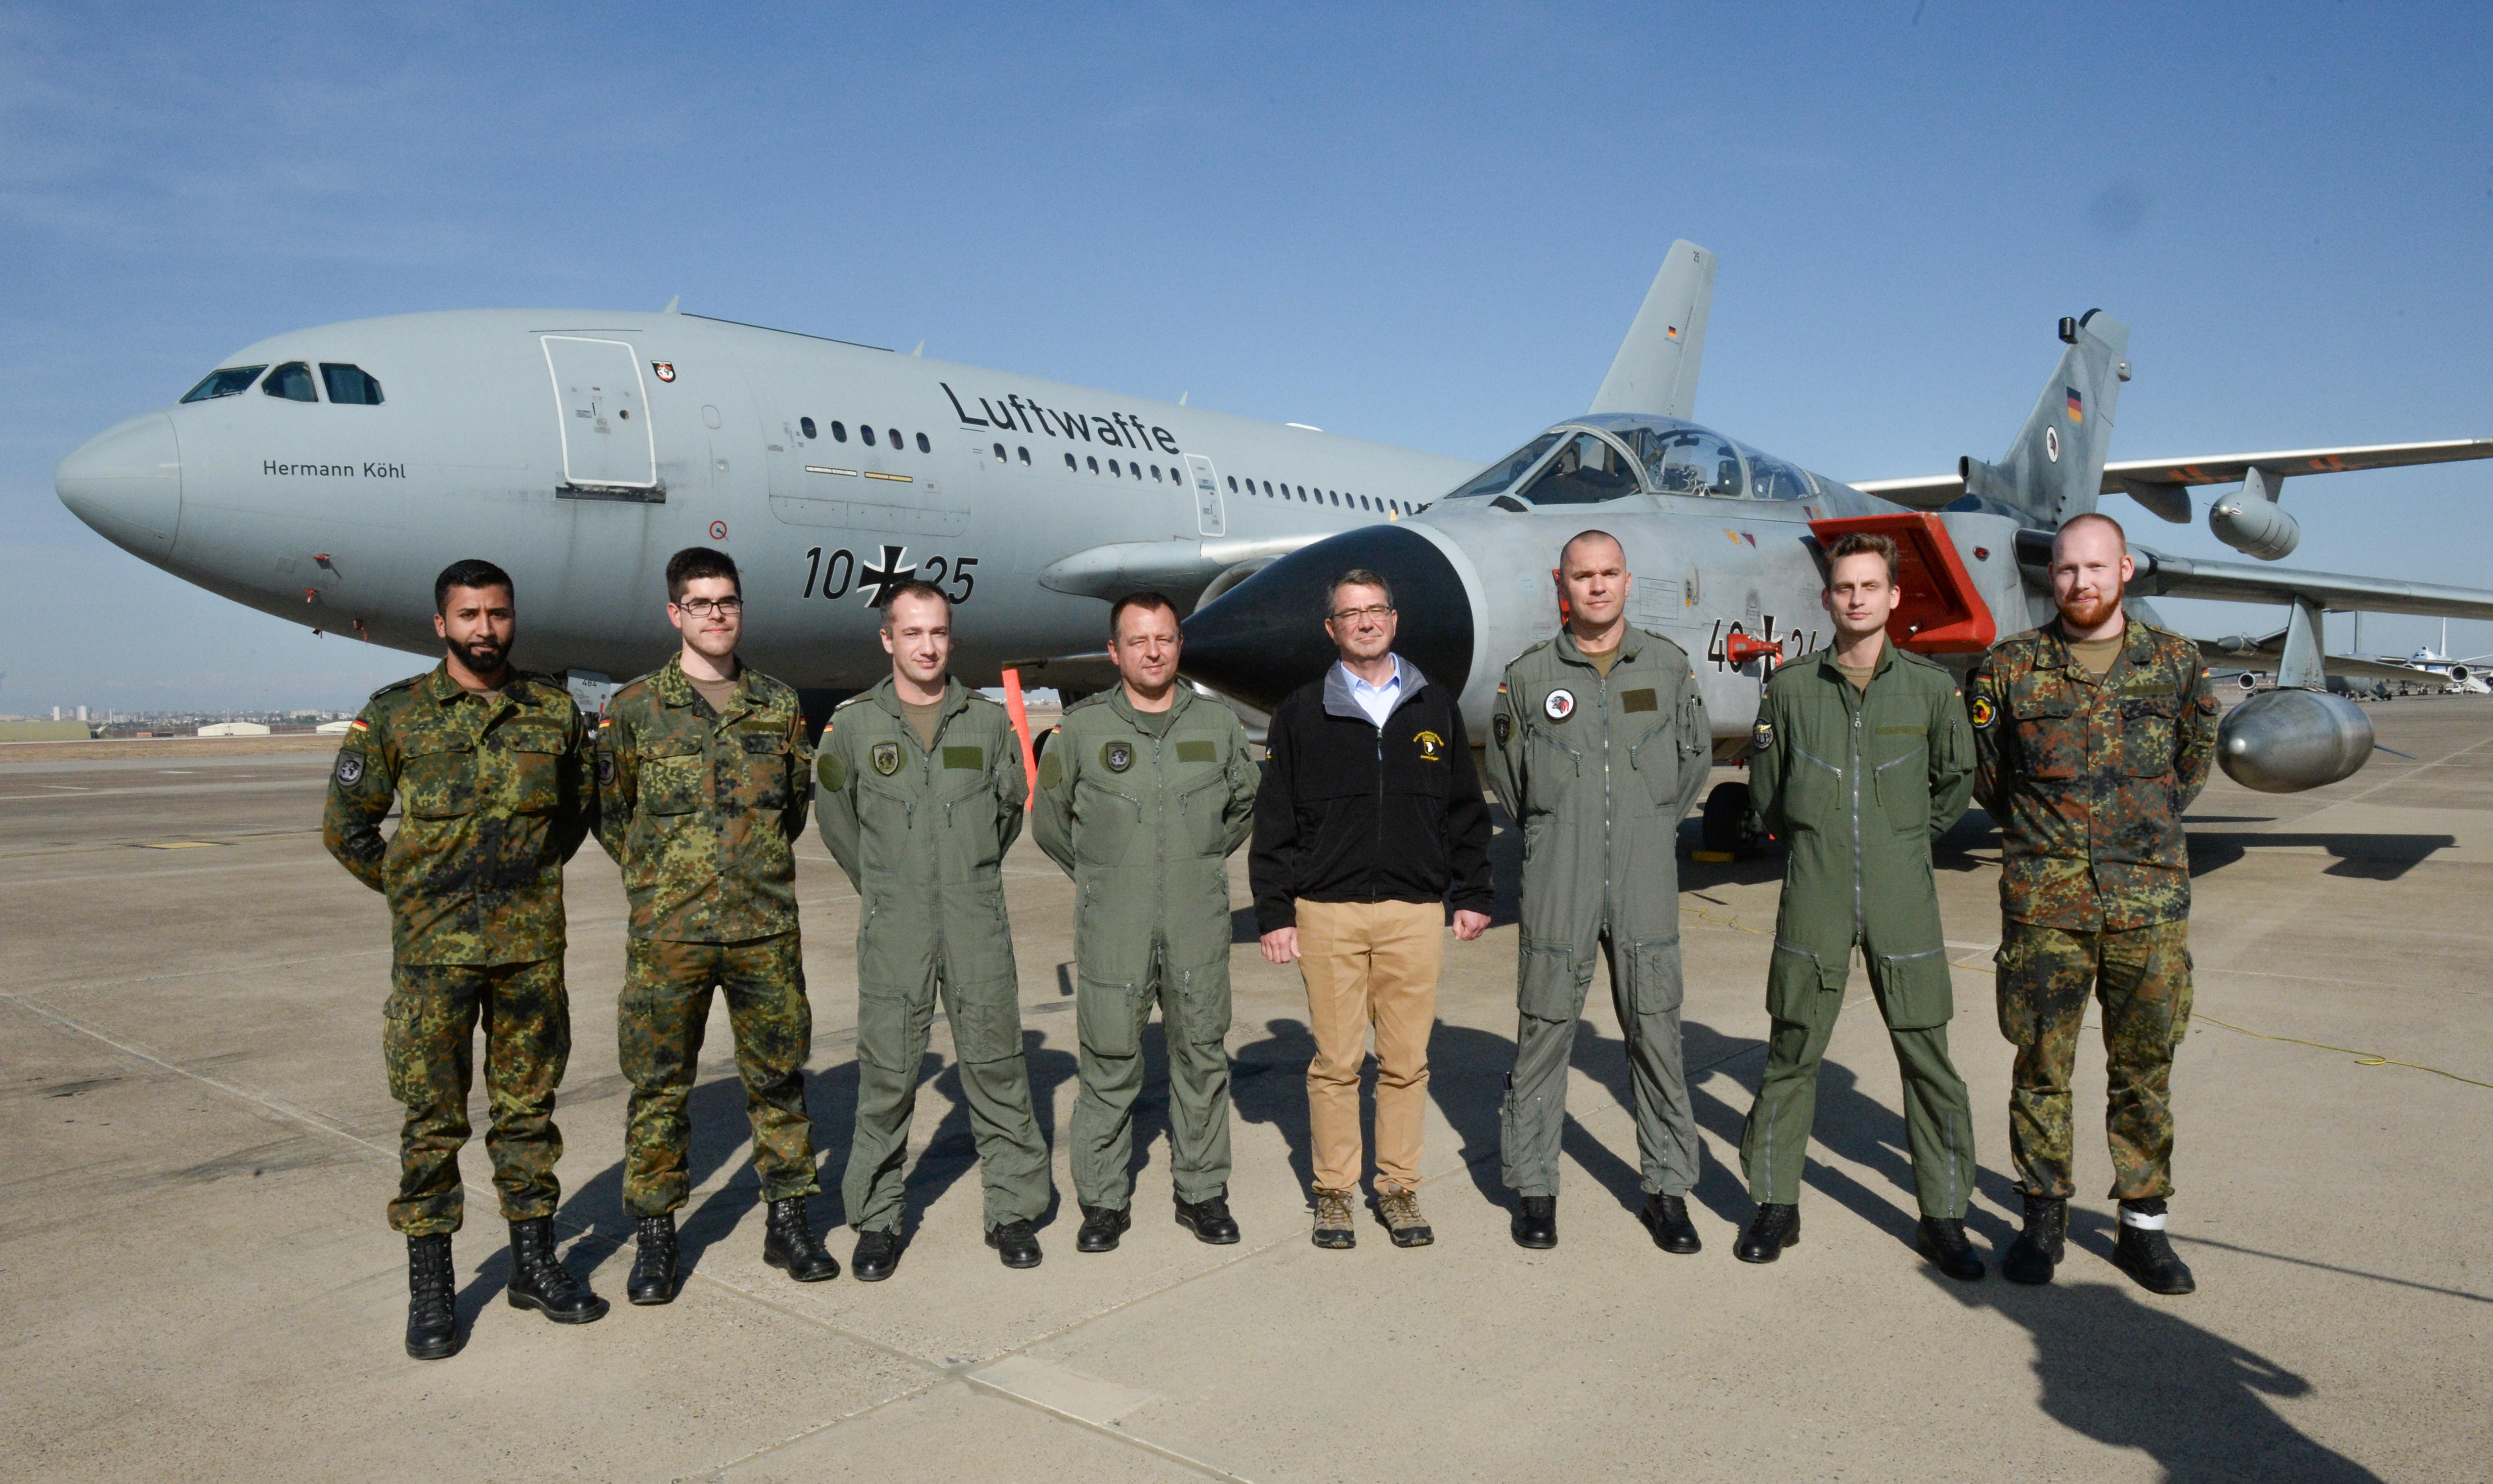 Secretary of Defense Ash Carter has used visits to Incirlik Air Base, such as his December 2015 visit above, to discuss accelerating the campaign against the Islamic State of Iraq and the Levant, or ISIL. US Army photo.